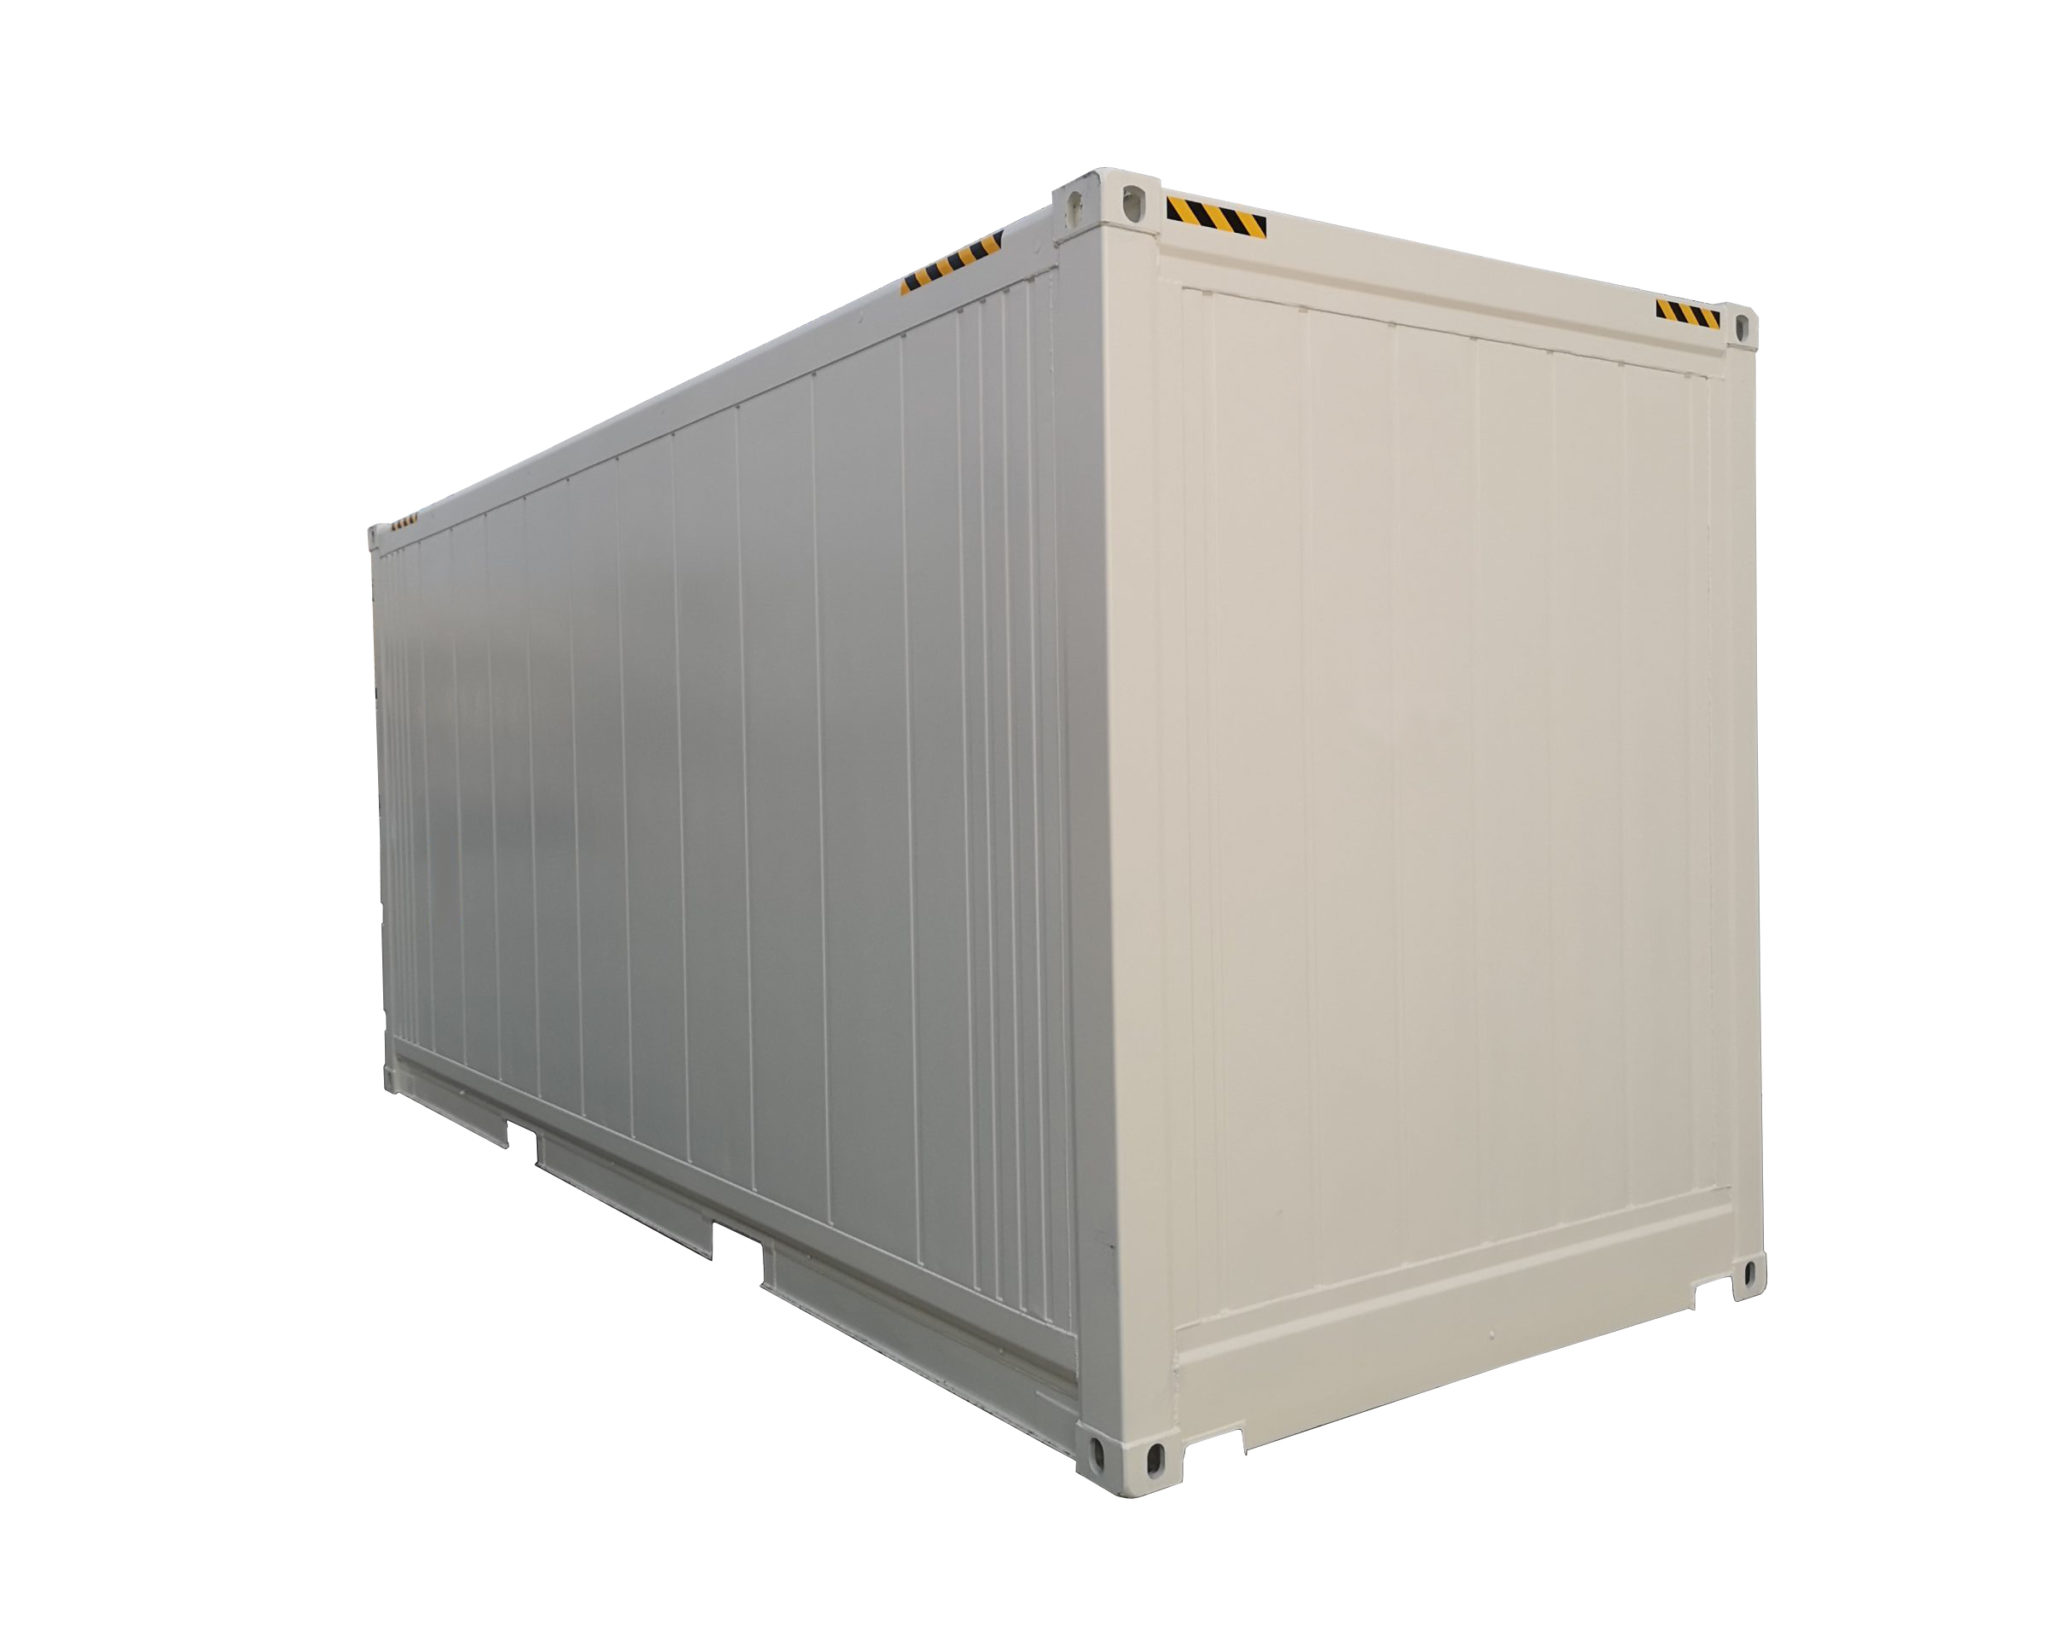 20 x 8 x 9.5 High Cube Insulated Shipping Container